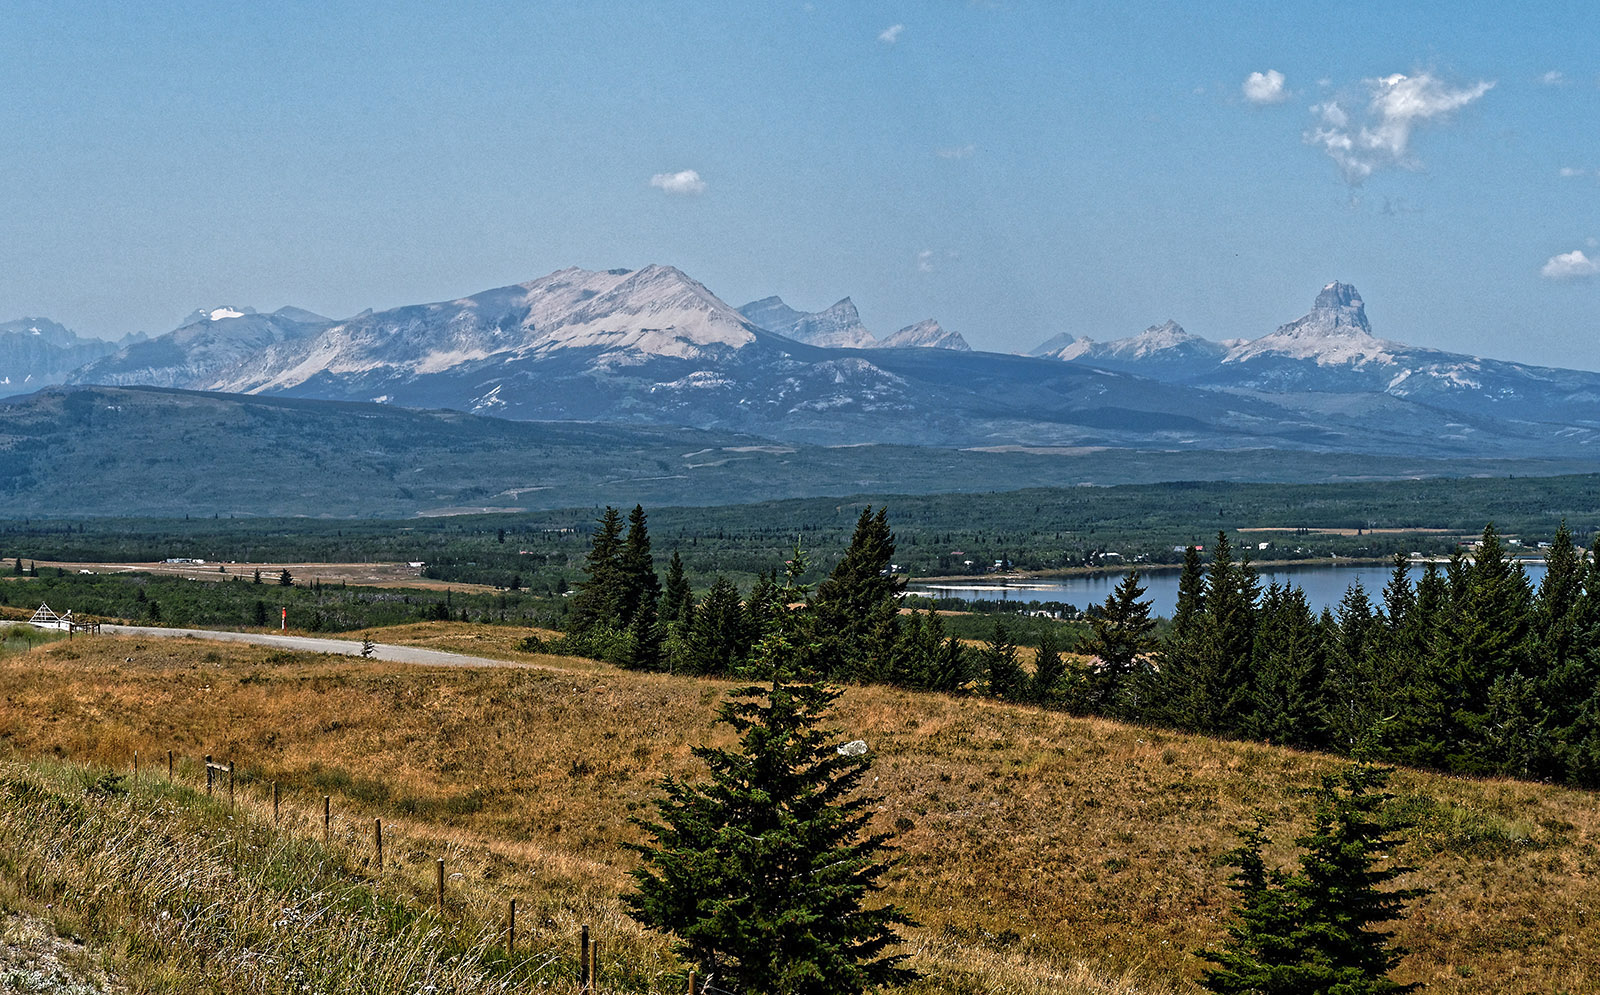 The view from East of Glacier National Park overlooking Babb, MT towards Chief Mountain at the far right.  The Lewis Overthrust fault continues from the left.  Erosion has isolated Chief Mountain from the rest of the strata in the overthrust section.